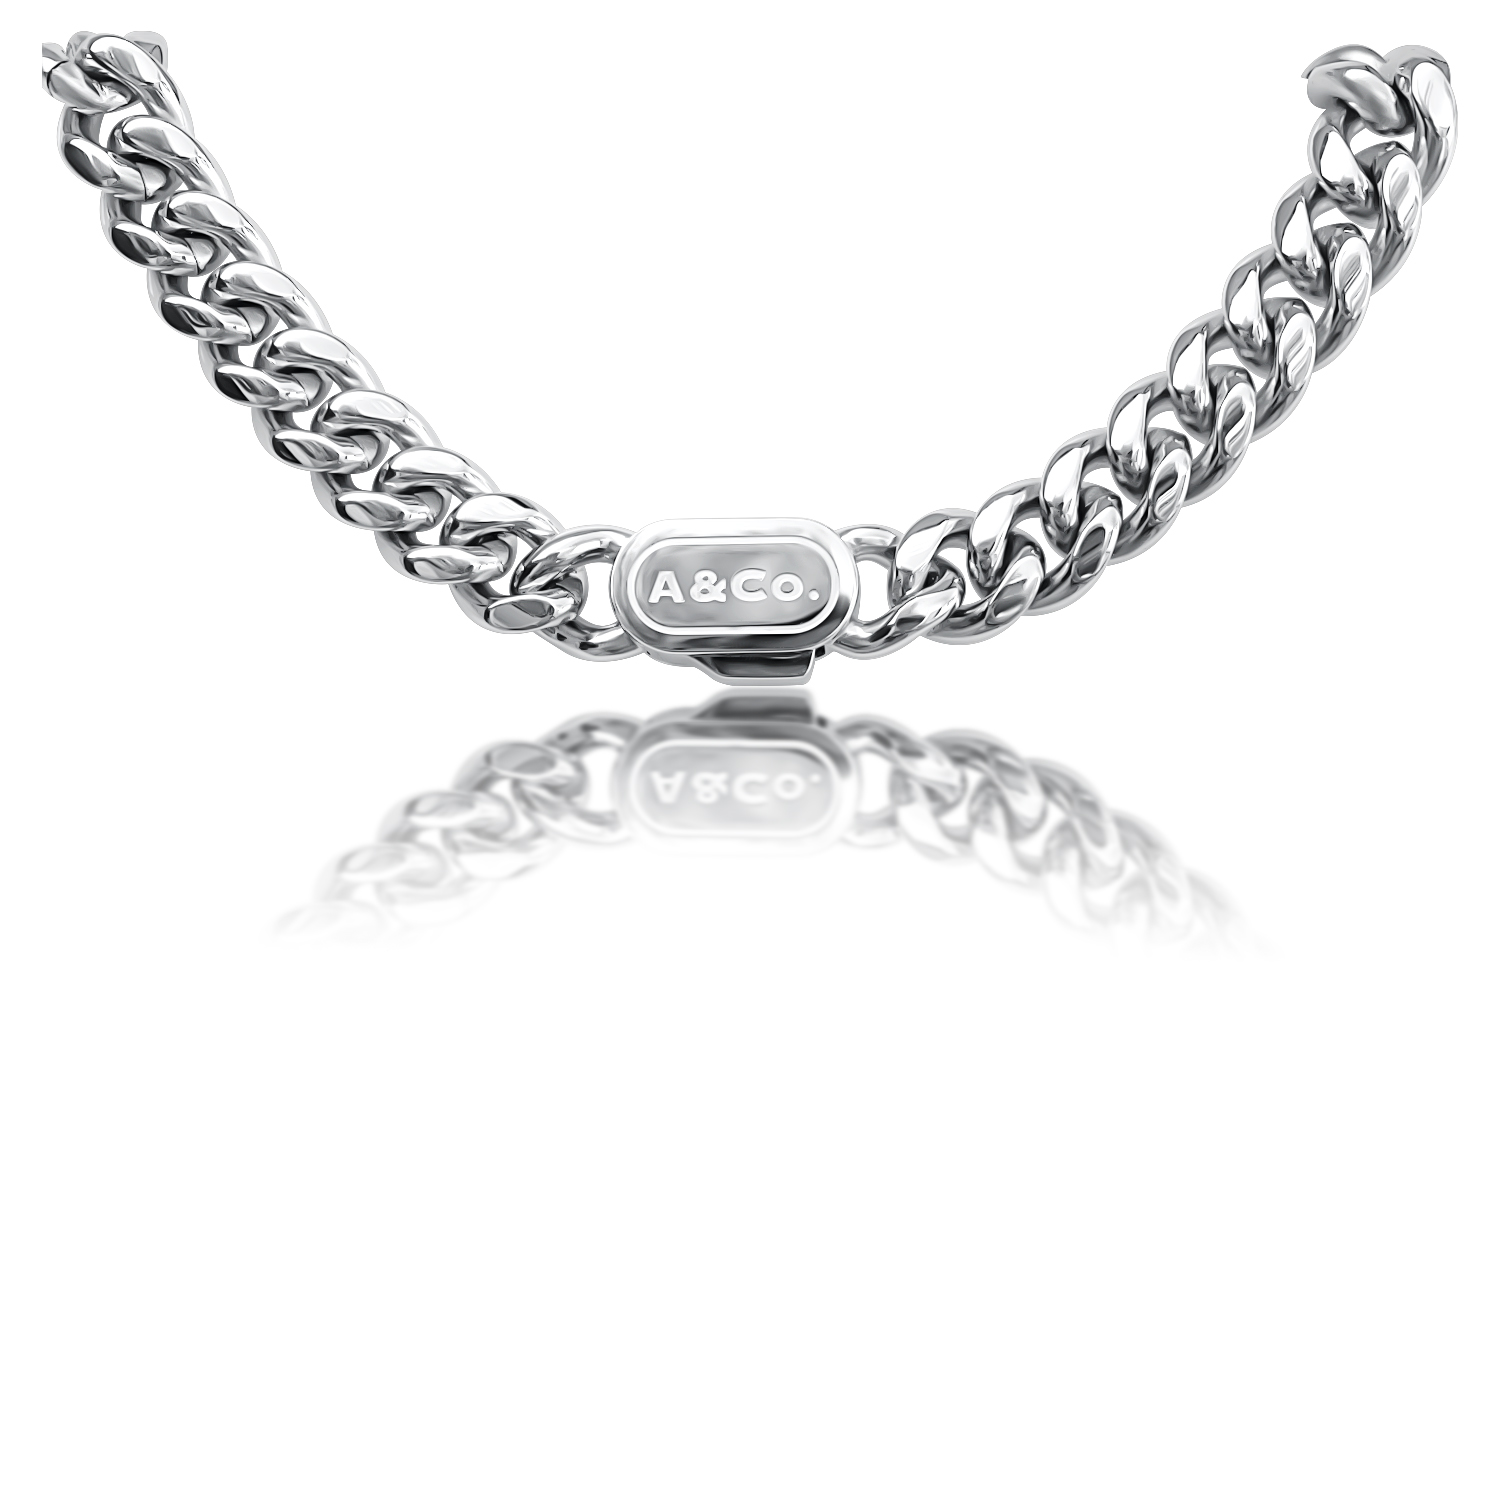 Big Chain Link Necklace | 925 Sterling Silver 22 Inches (55.88cm)